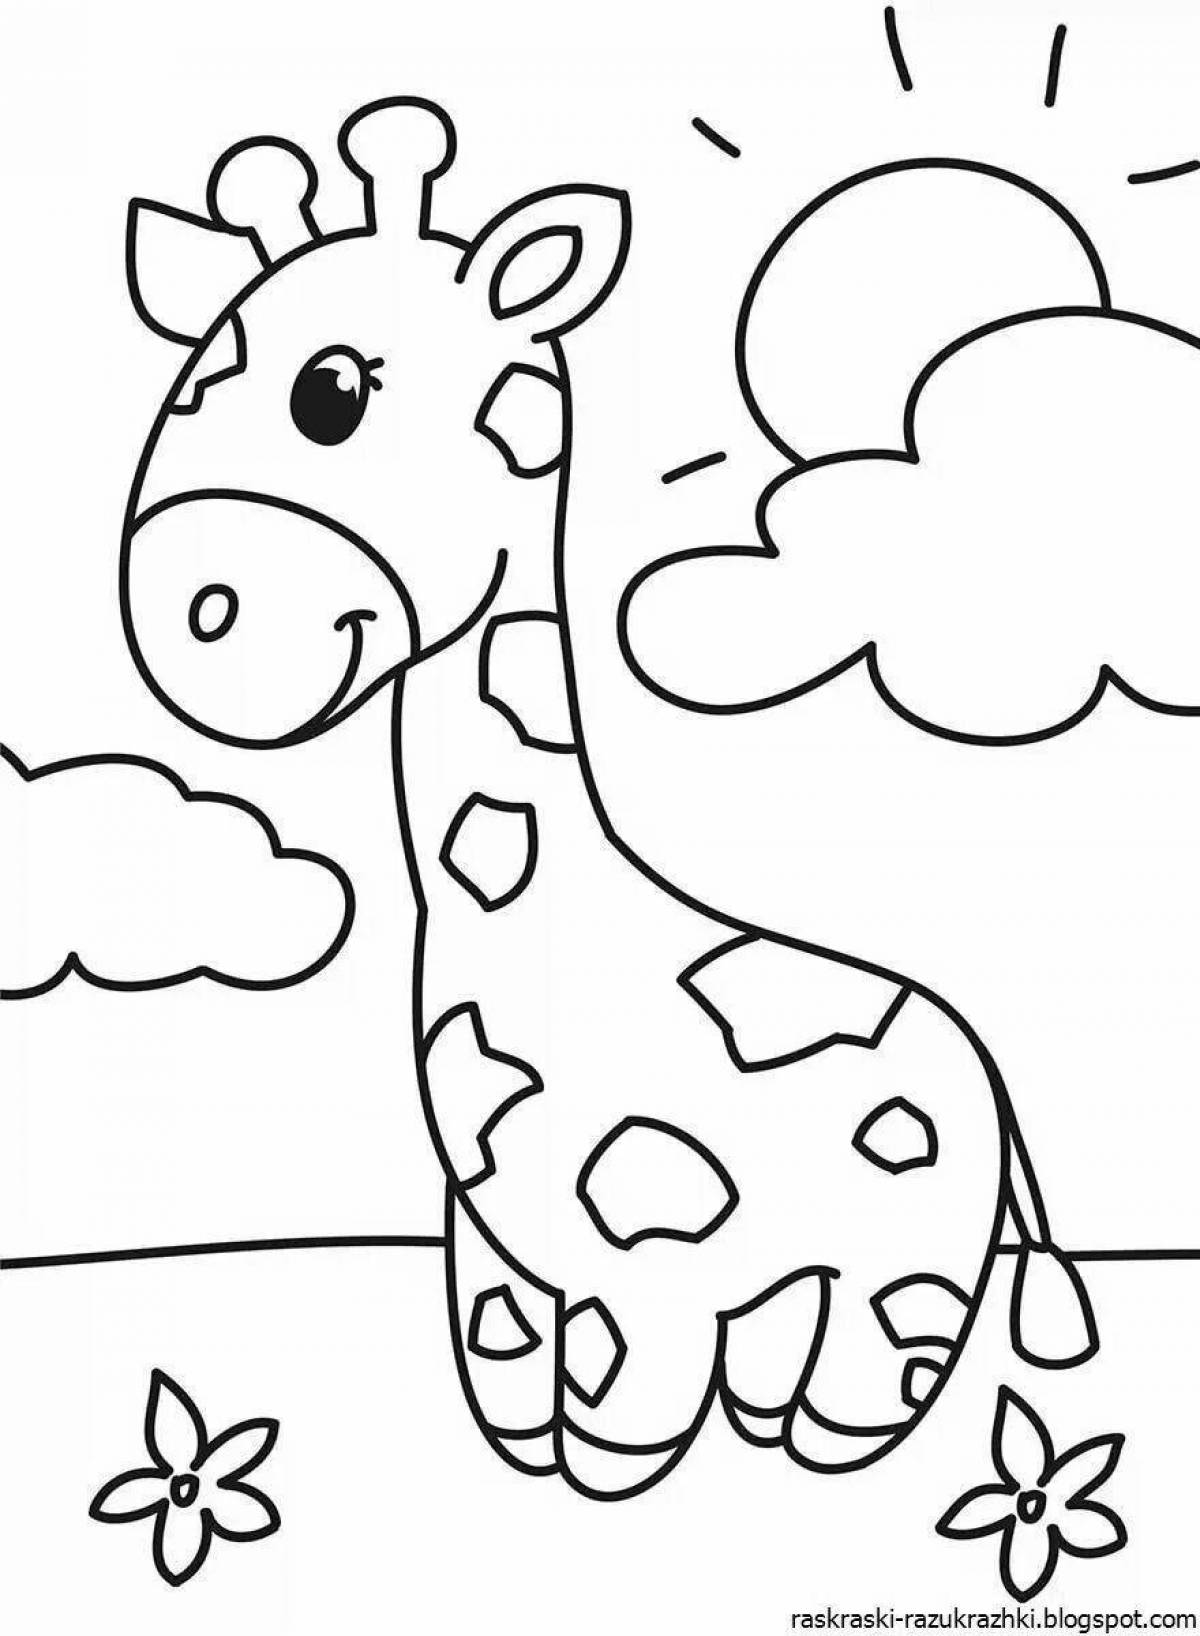 Coloring pages for children 3-4 years old: simple animals